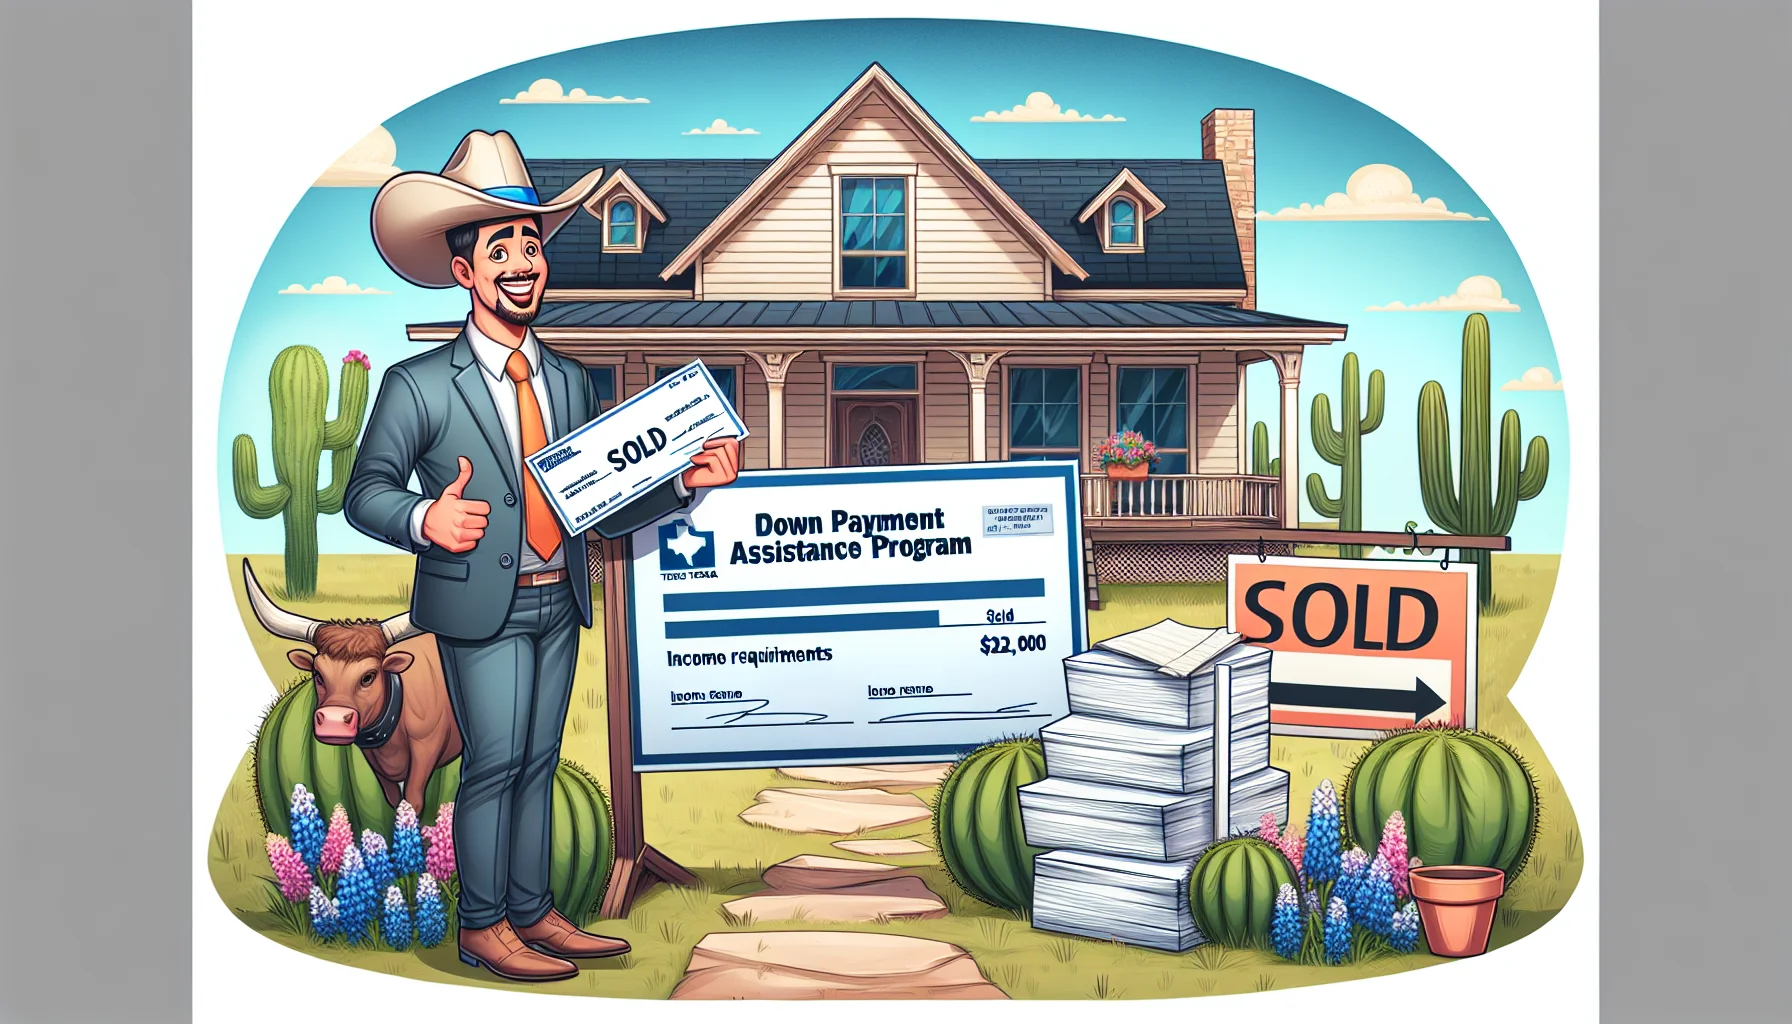 Illustration of a comical, realistic scenario involving a Texas down payment assistance program. The image highlights the ideal case regarding real estate and income requirements. It features a well-dressed individual happily examining an oversized check symbolizing the aid from the program while standing in front of a charming Texas-style home with a for-sale sign displaying a 'Sold' plaque. In the background, there's a pile of paperwork indicating the income requirements which are easily achieved by the individual. Cactuses, bluebonnets, and longhorn cattle are there to give a touch of Texas charm.